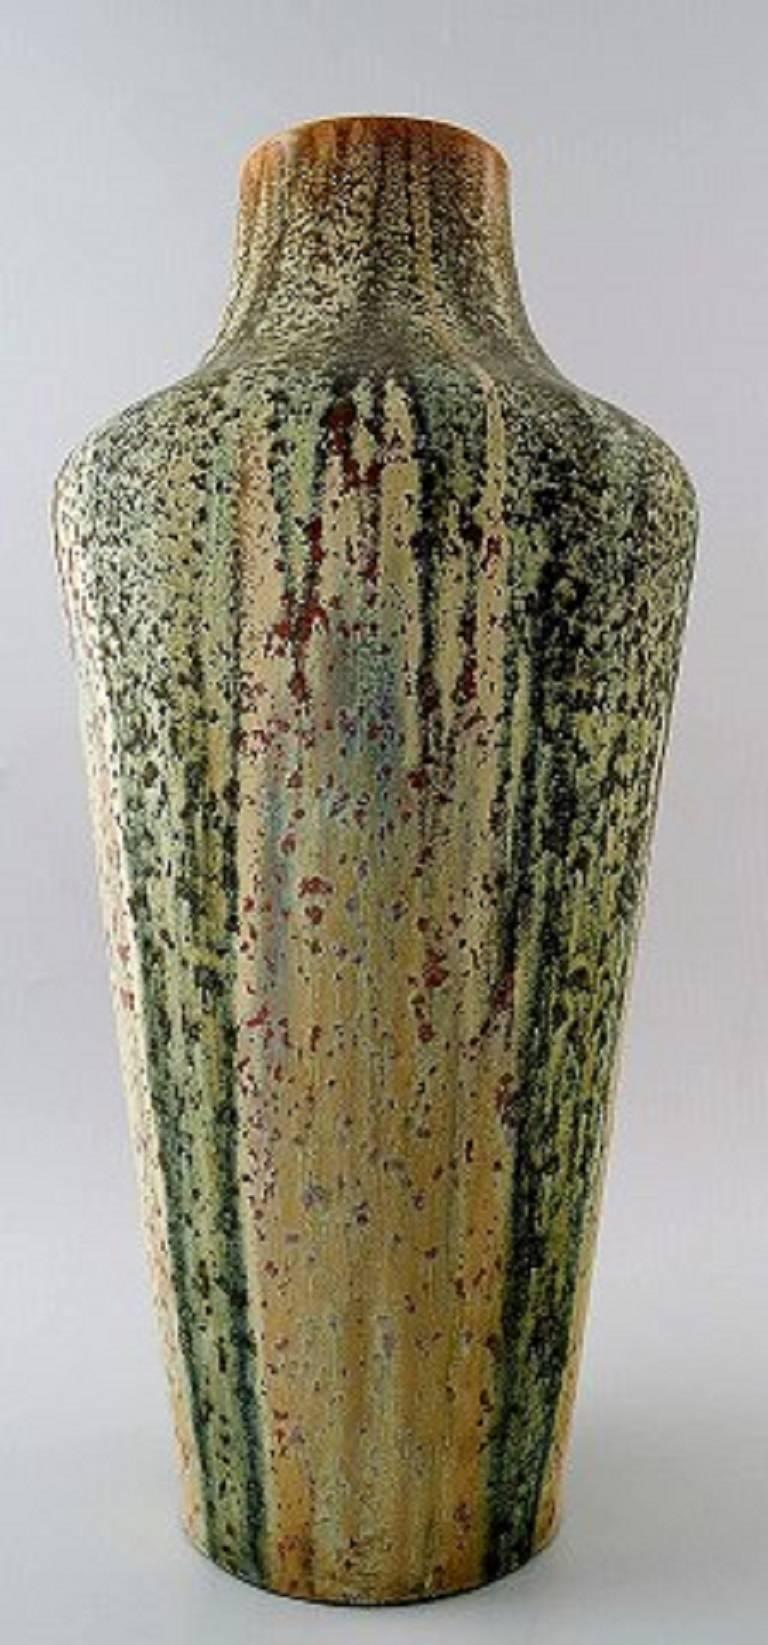 Jean Langlade (1879-1928) French ceramist.
Large floor vase, early 1900s.
Beautiful glaze in many shades.
Stamped.
In perfect condition.
Measures 49 cm. x 22 cm.